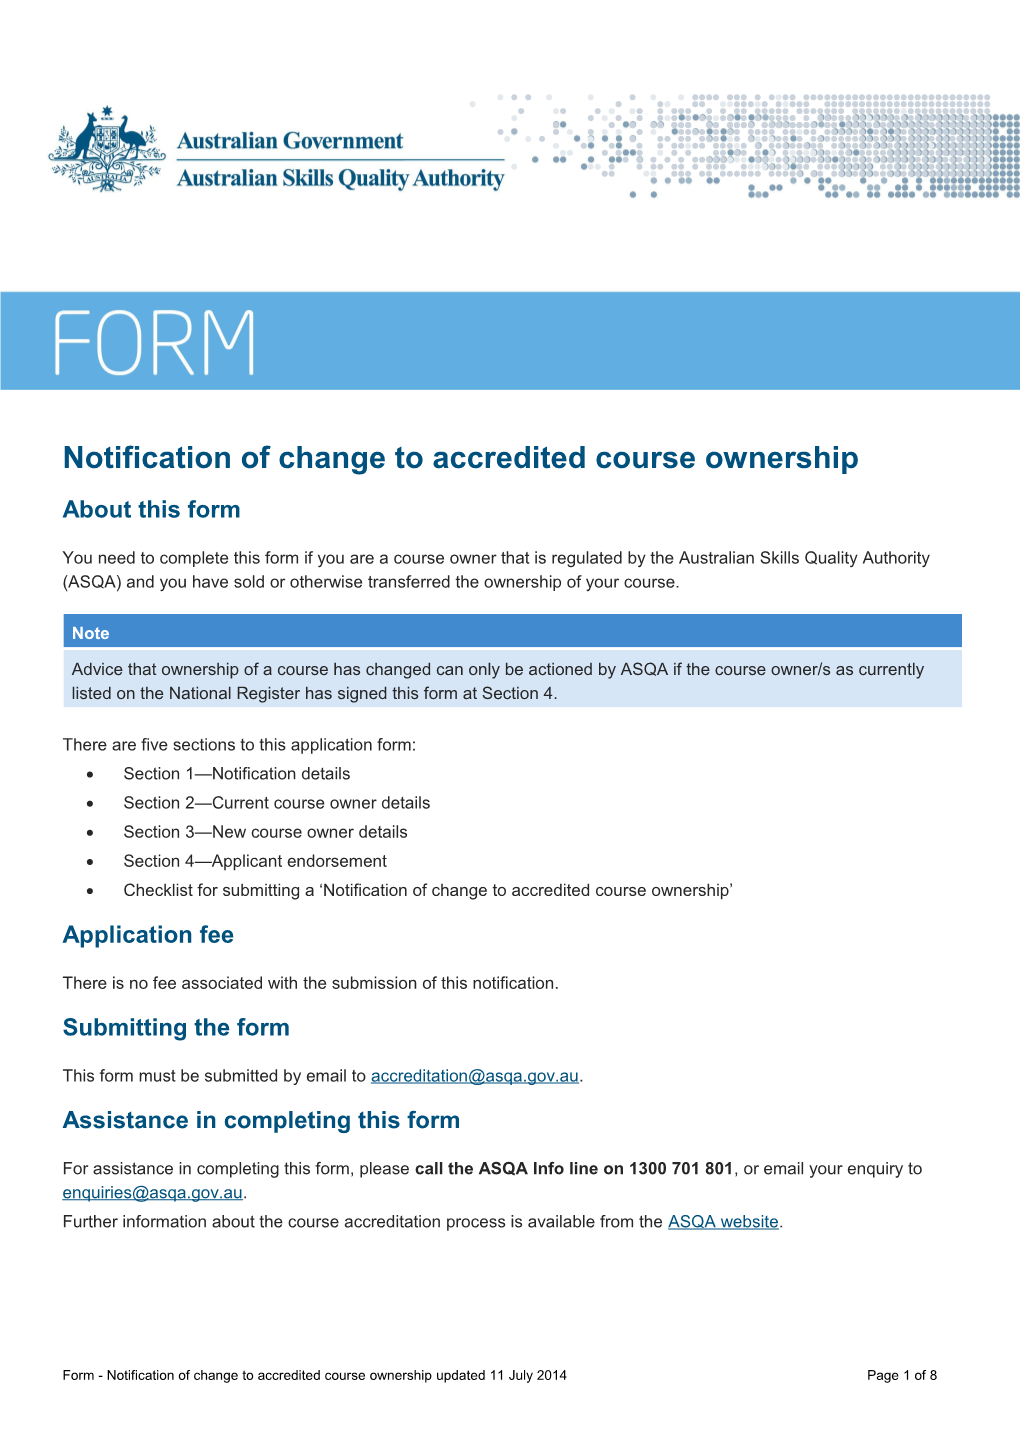 Notification of Change to Accredited Course Ownership